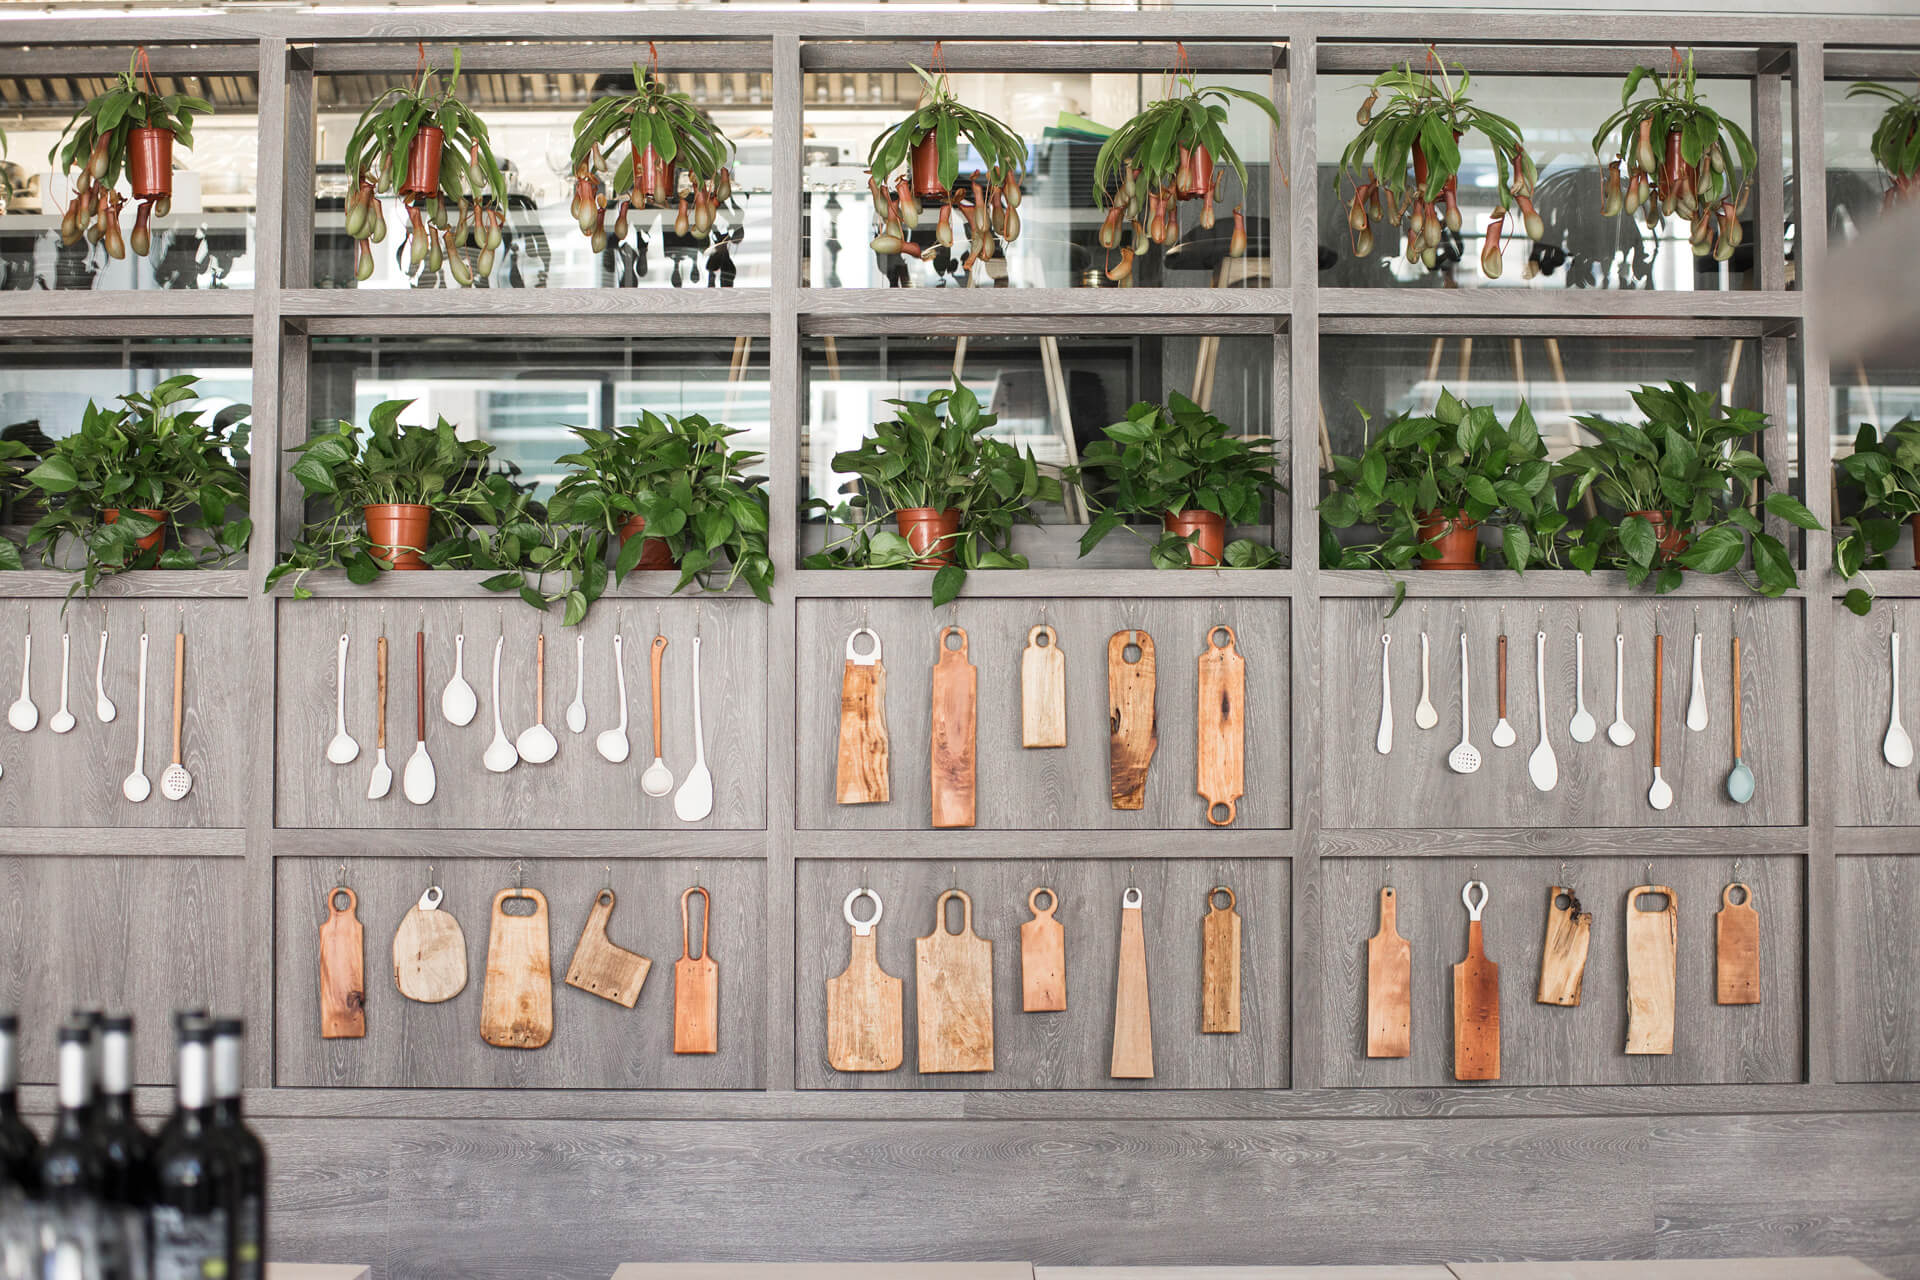 wooden utensils hanging on wall, plants